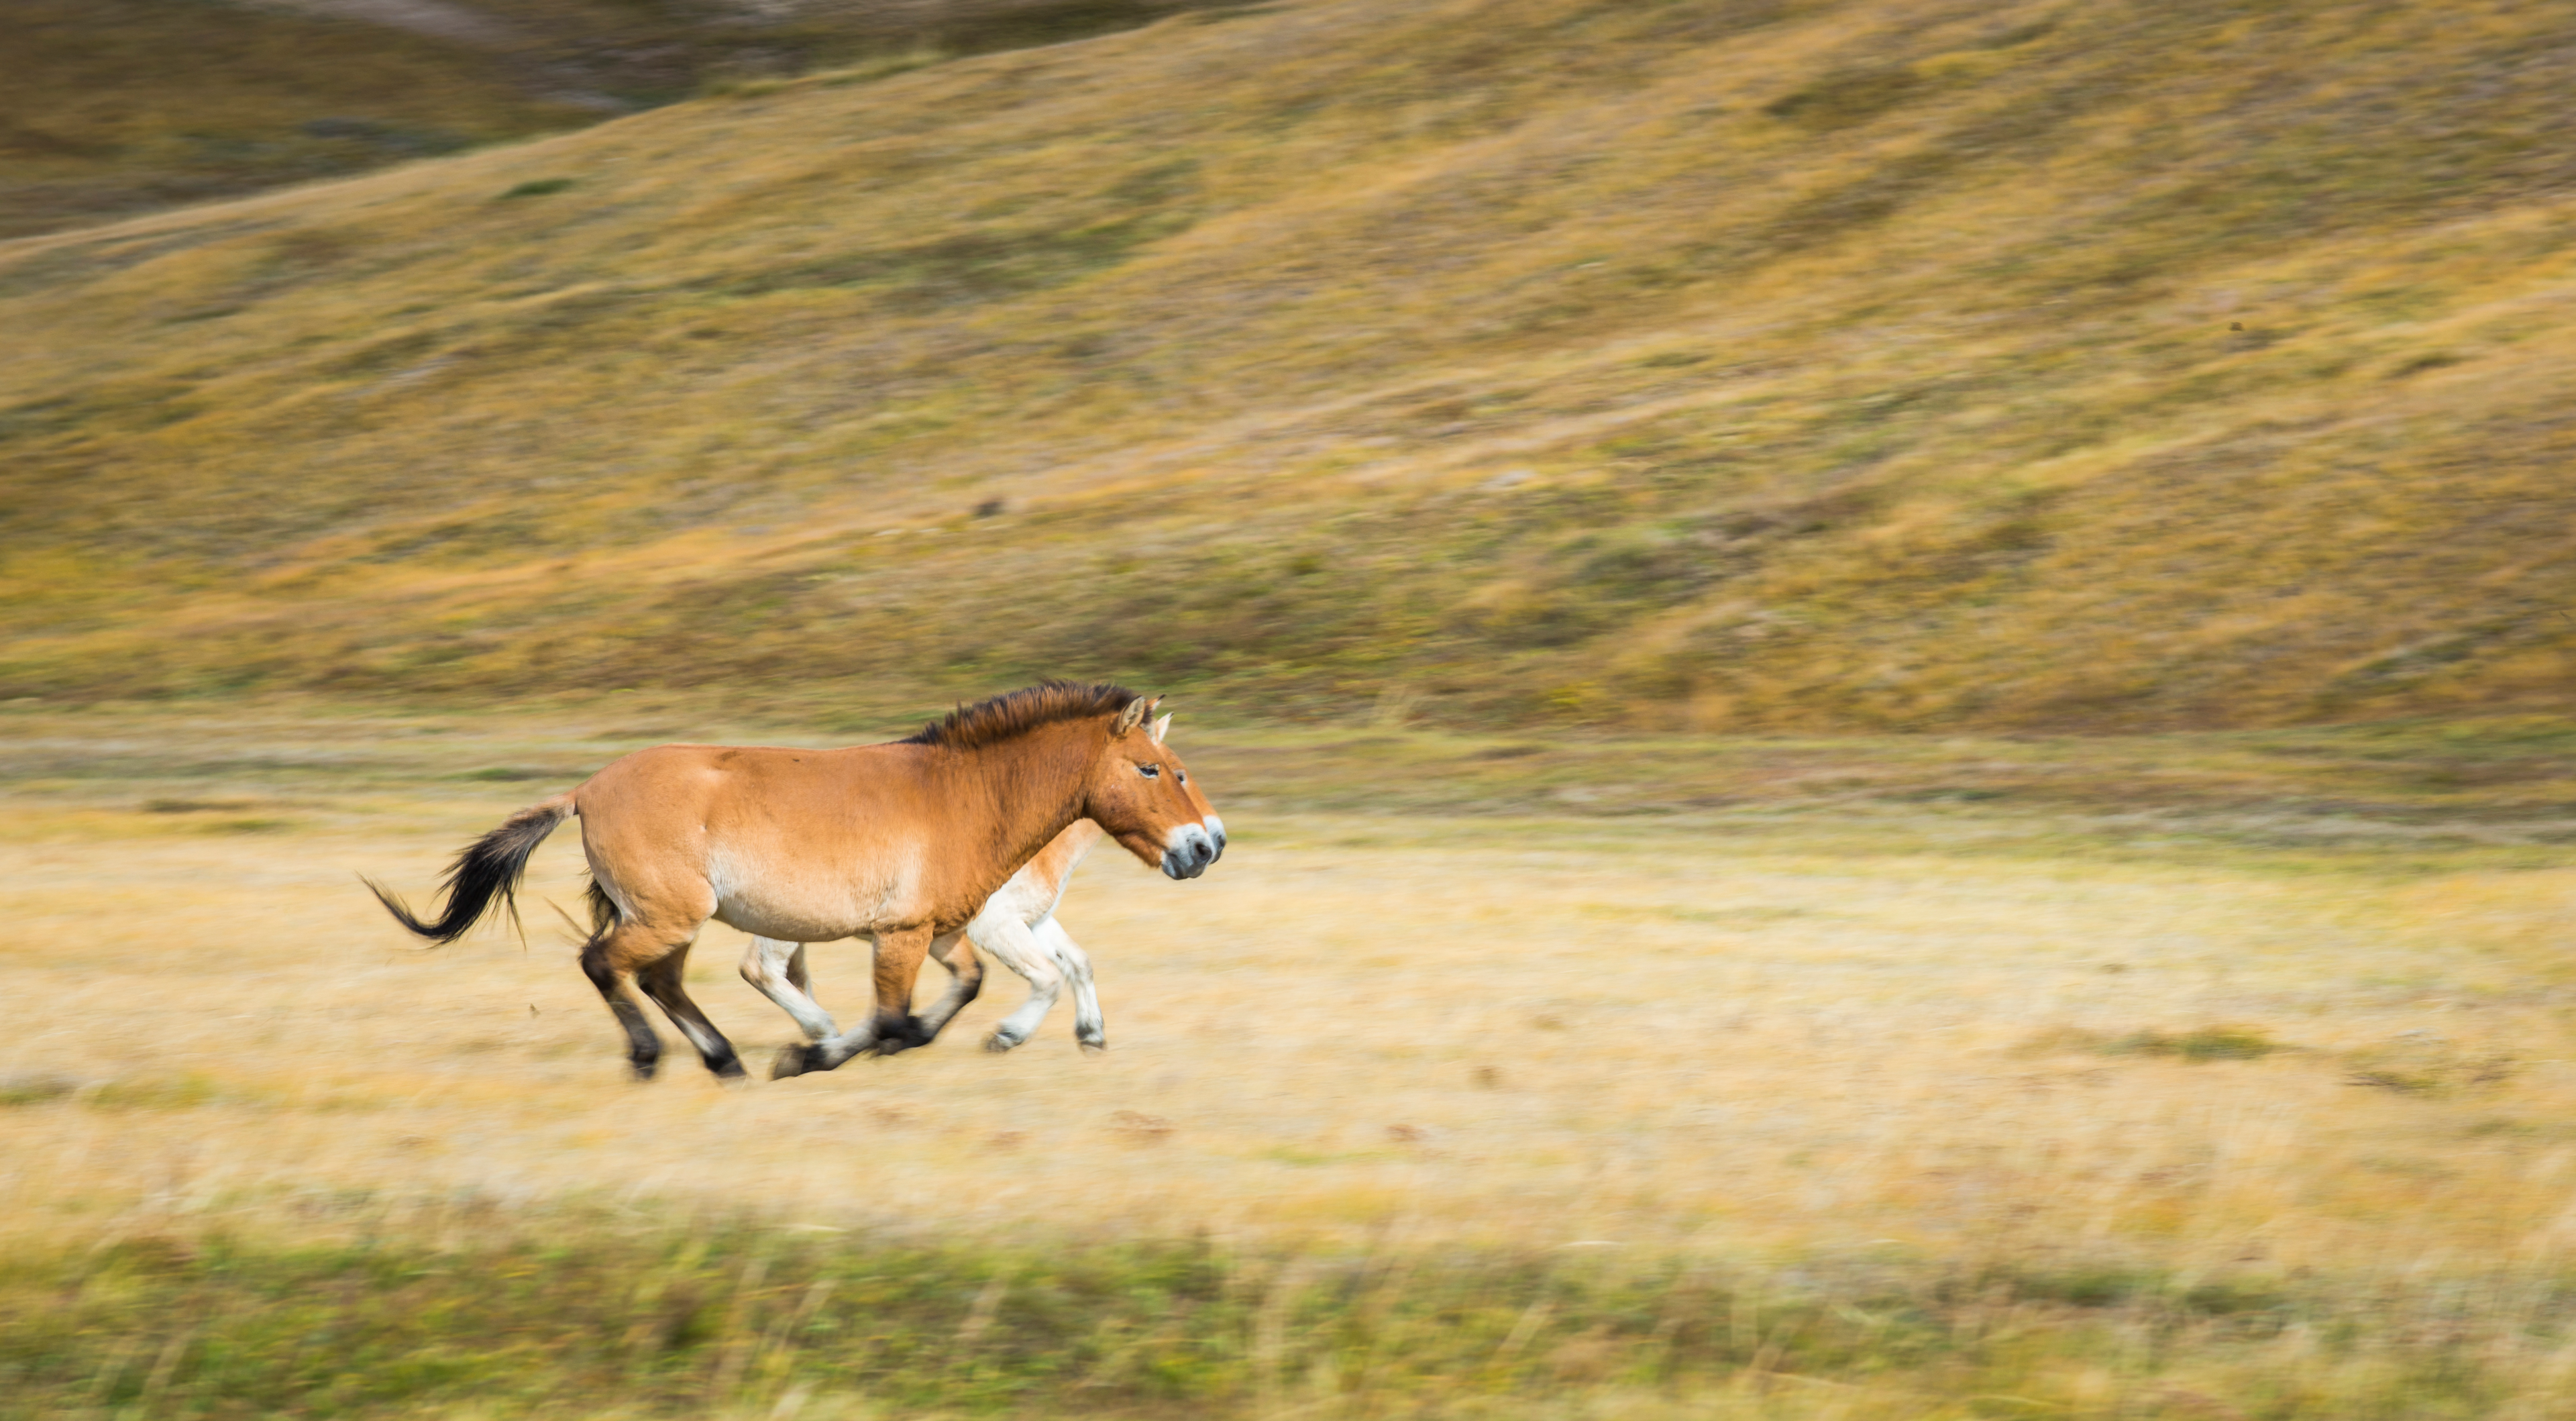 Watch the wild horses in Mongolia